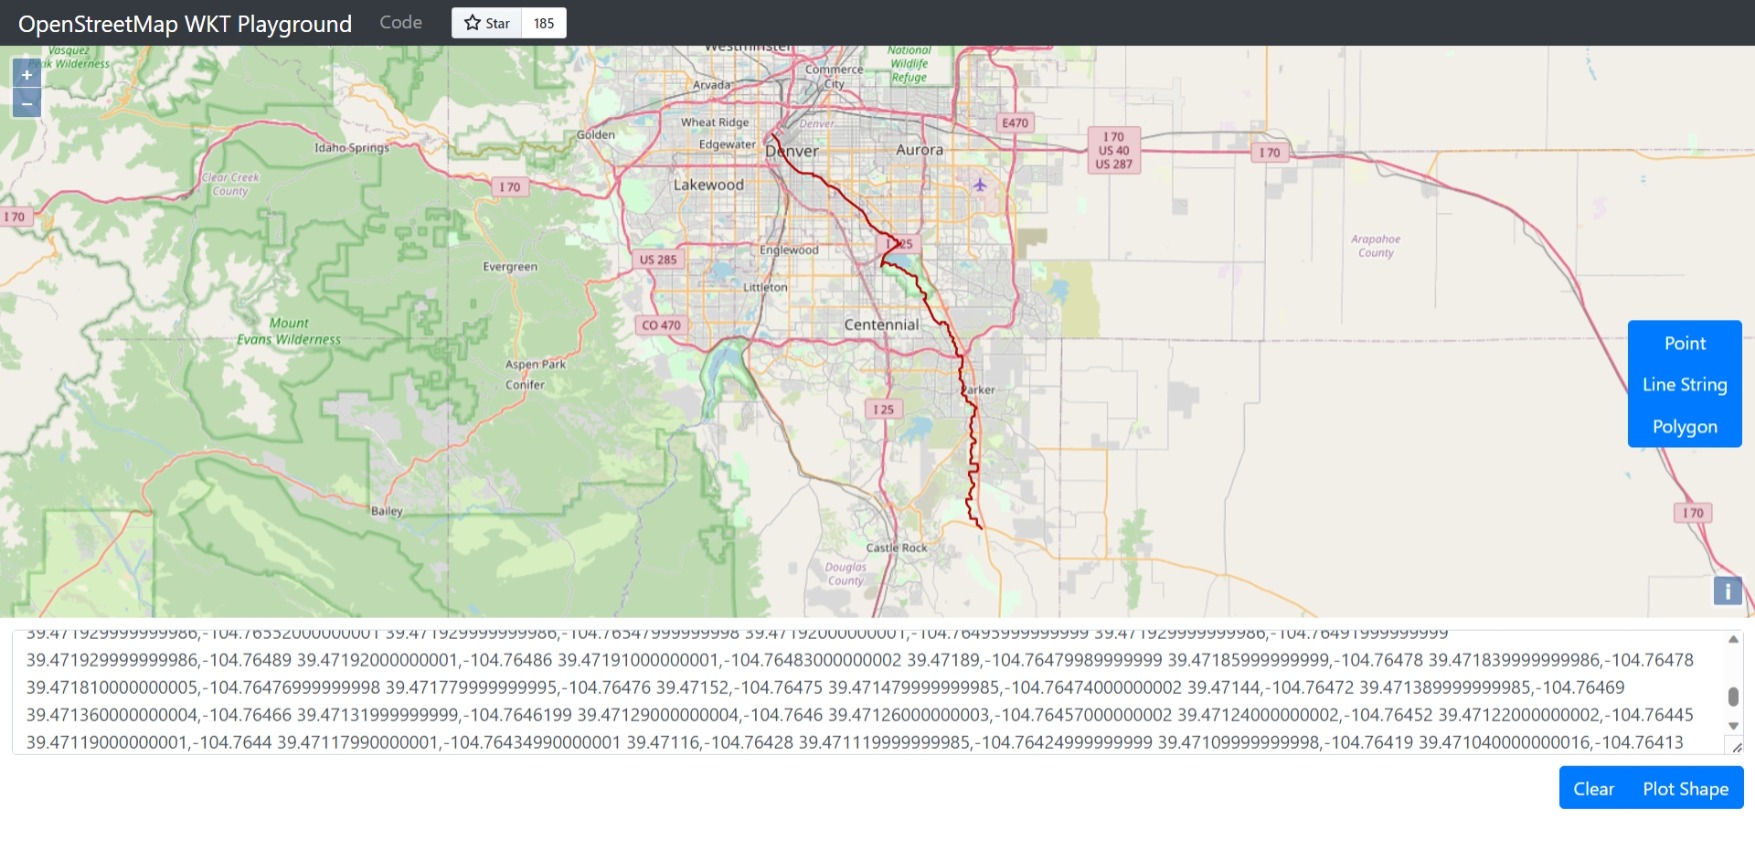 OpenStreetMap WKT Playground: 3526 points with LINESTRING